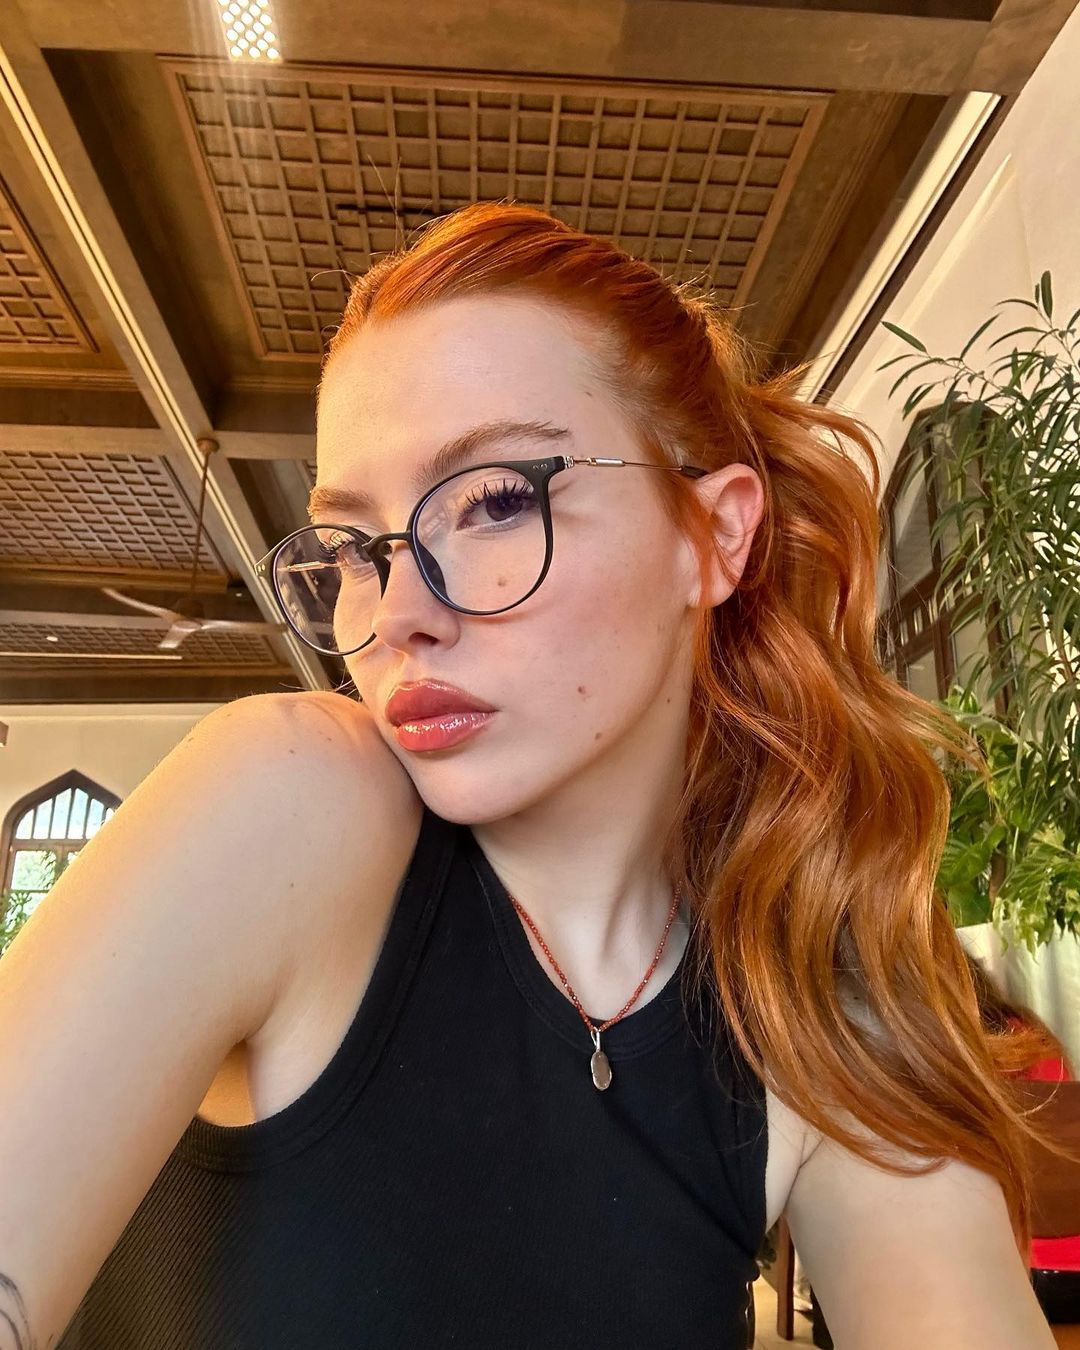 A woman sporting vibrant red hair, glasses, and a black top, exuding a confident and artistic vibe.